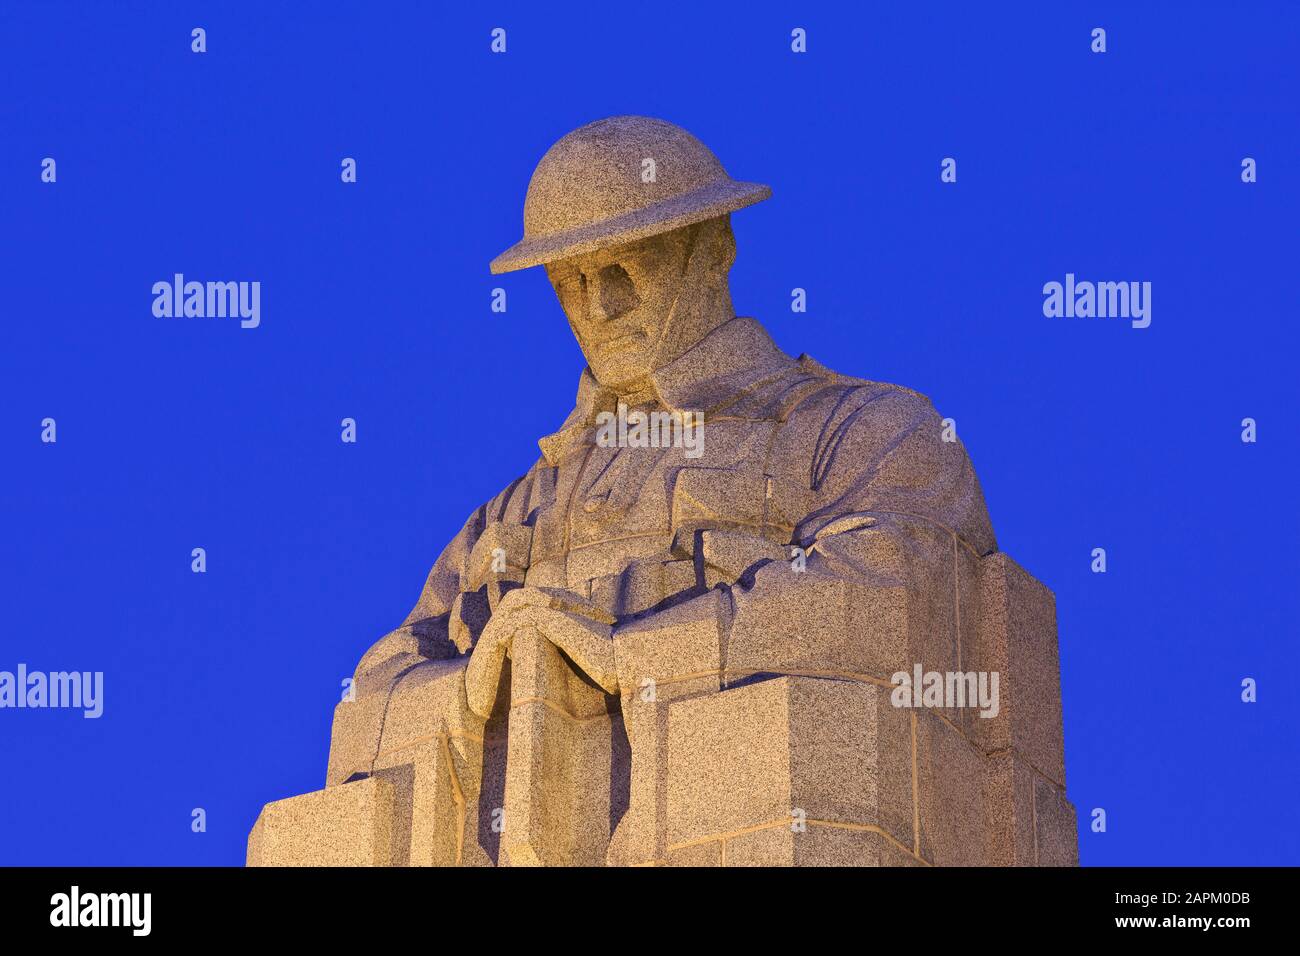 The Brooding Soldier statue at the Saint Julien Memorial marking the 1st German gas attacks from 22-24 April 1915 in Langemark-Poelkapelle, Belgium Stock Photo